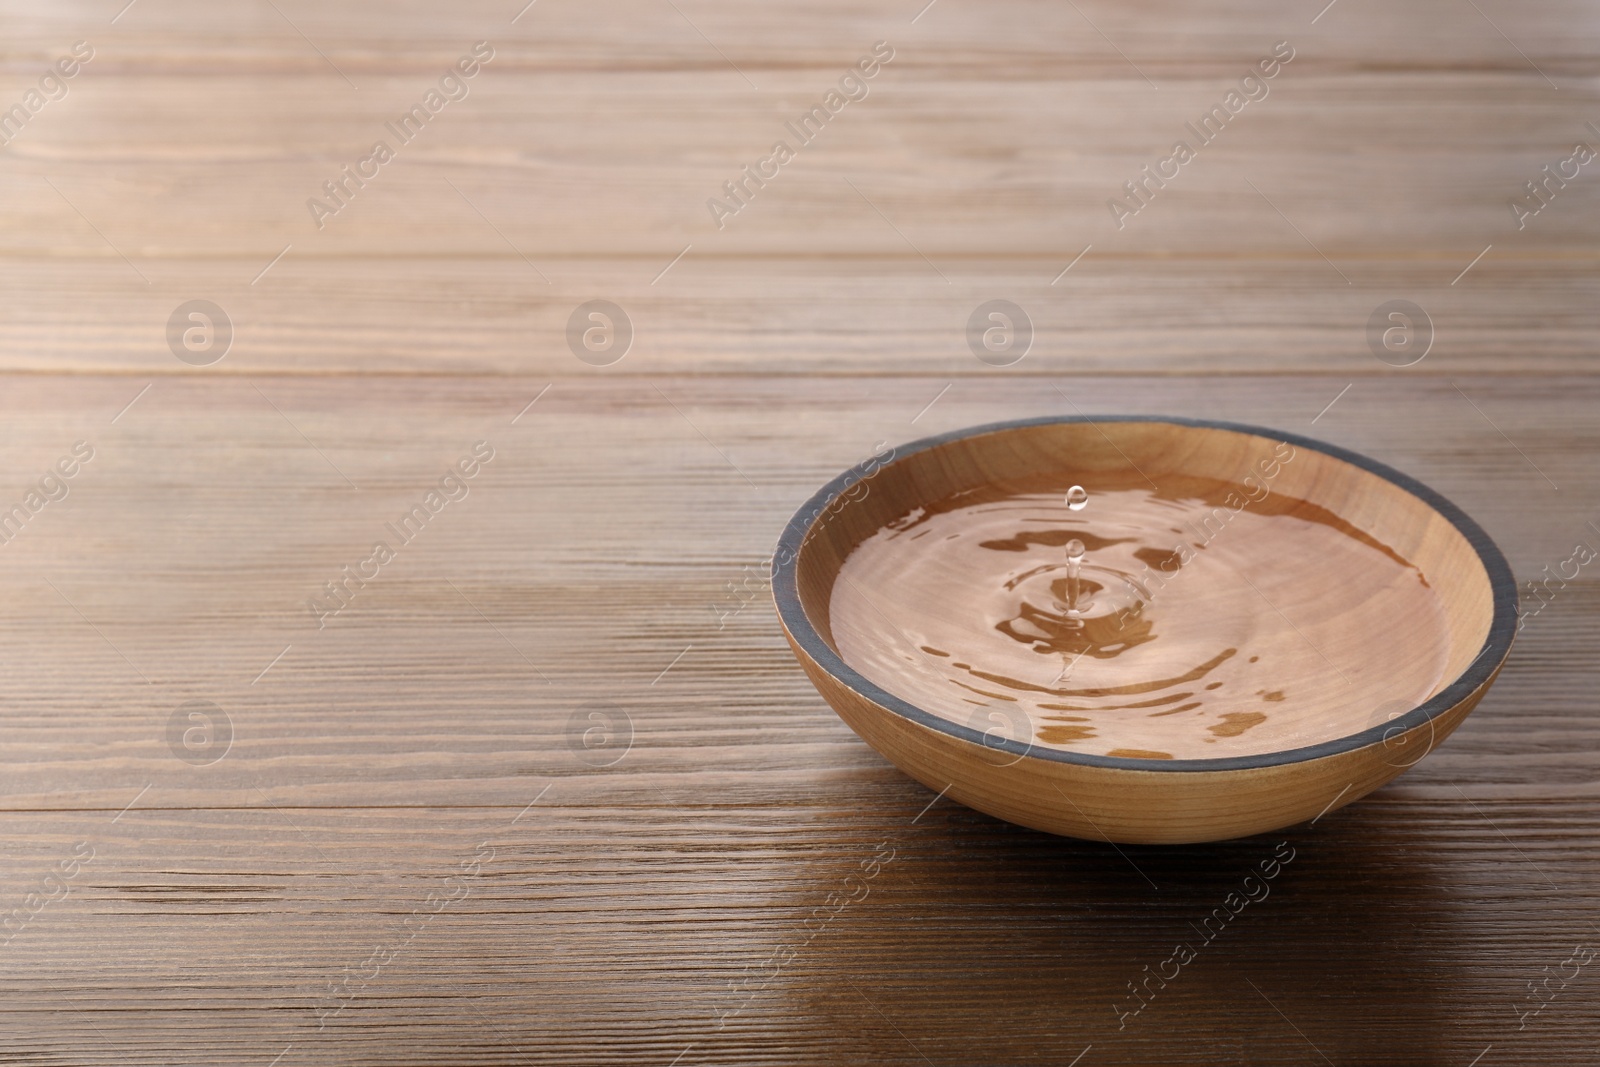 Photo of Drop falling down into bowl with clear water on wooden table. Space for text